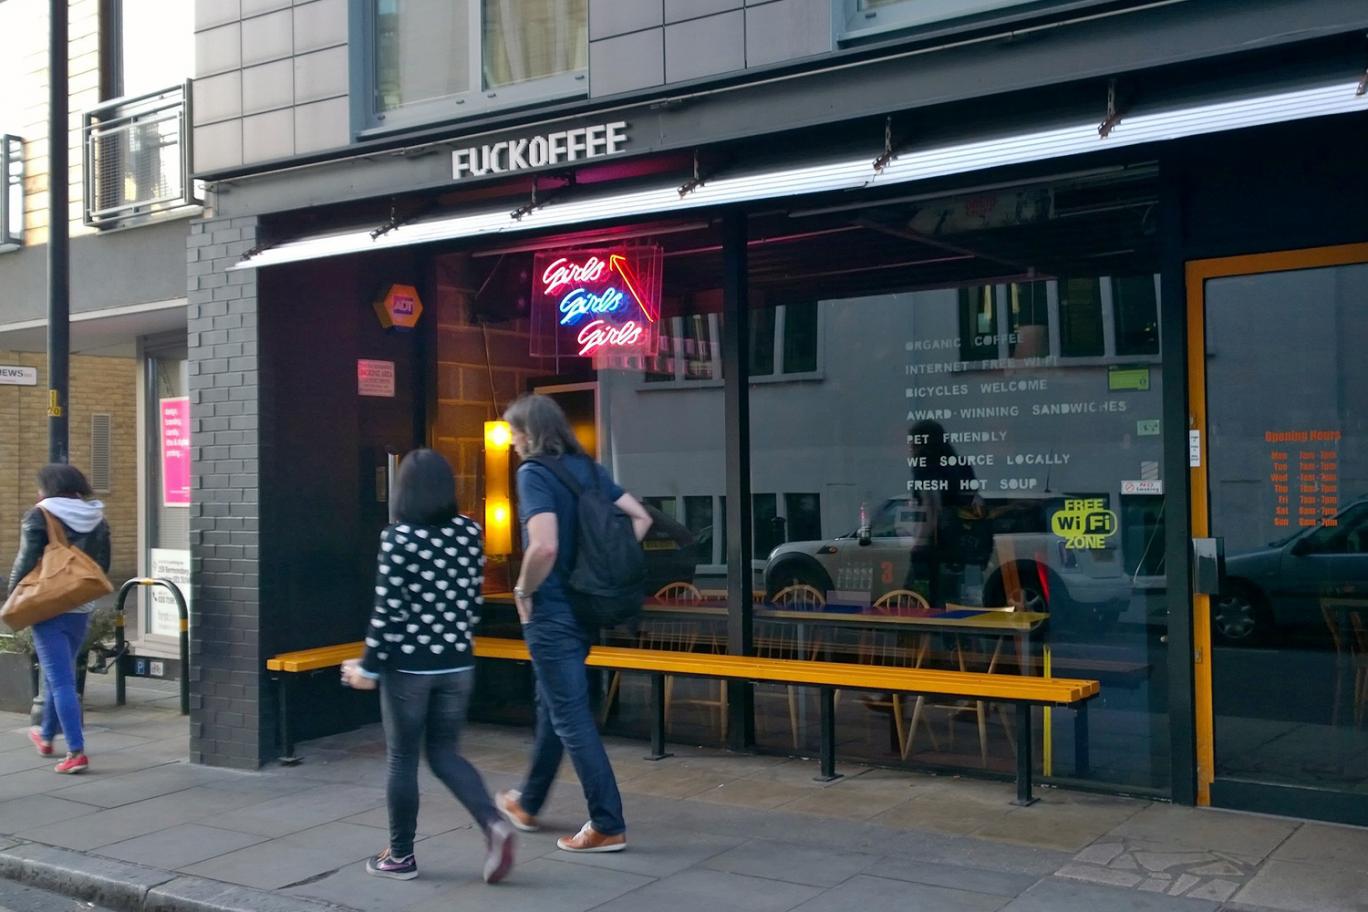 F***offee in Bermondsey is under legal scrutiny for it's signage